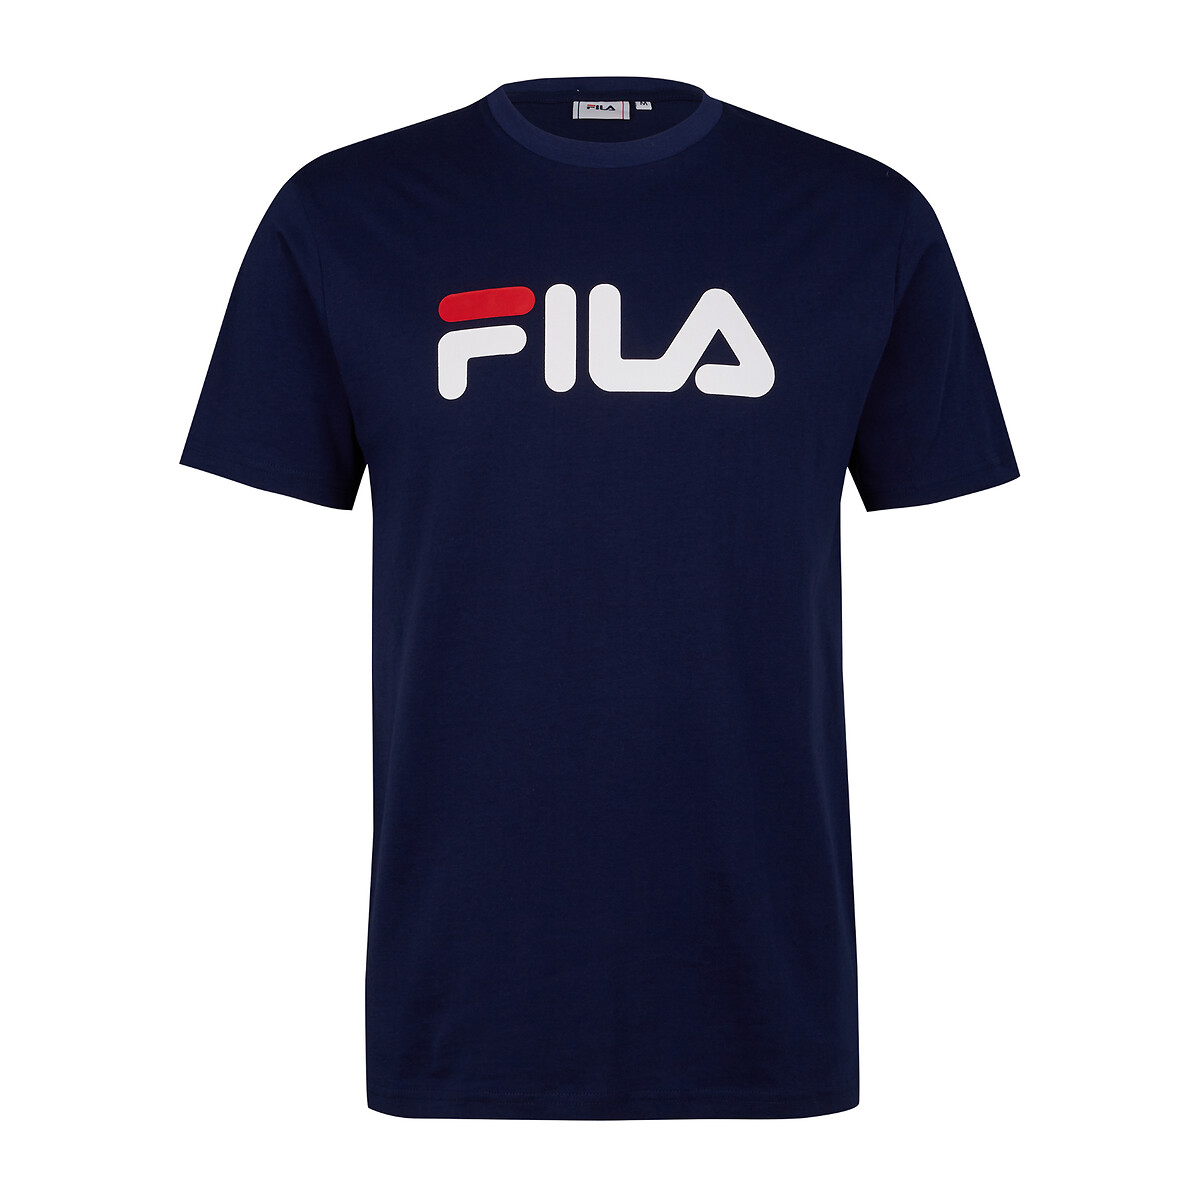 Foundation Cotton T-Shirt with Large Logo Print and Short Sleeves